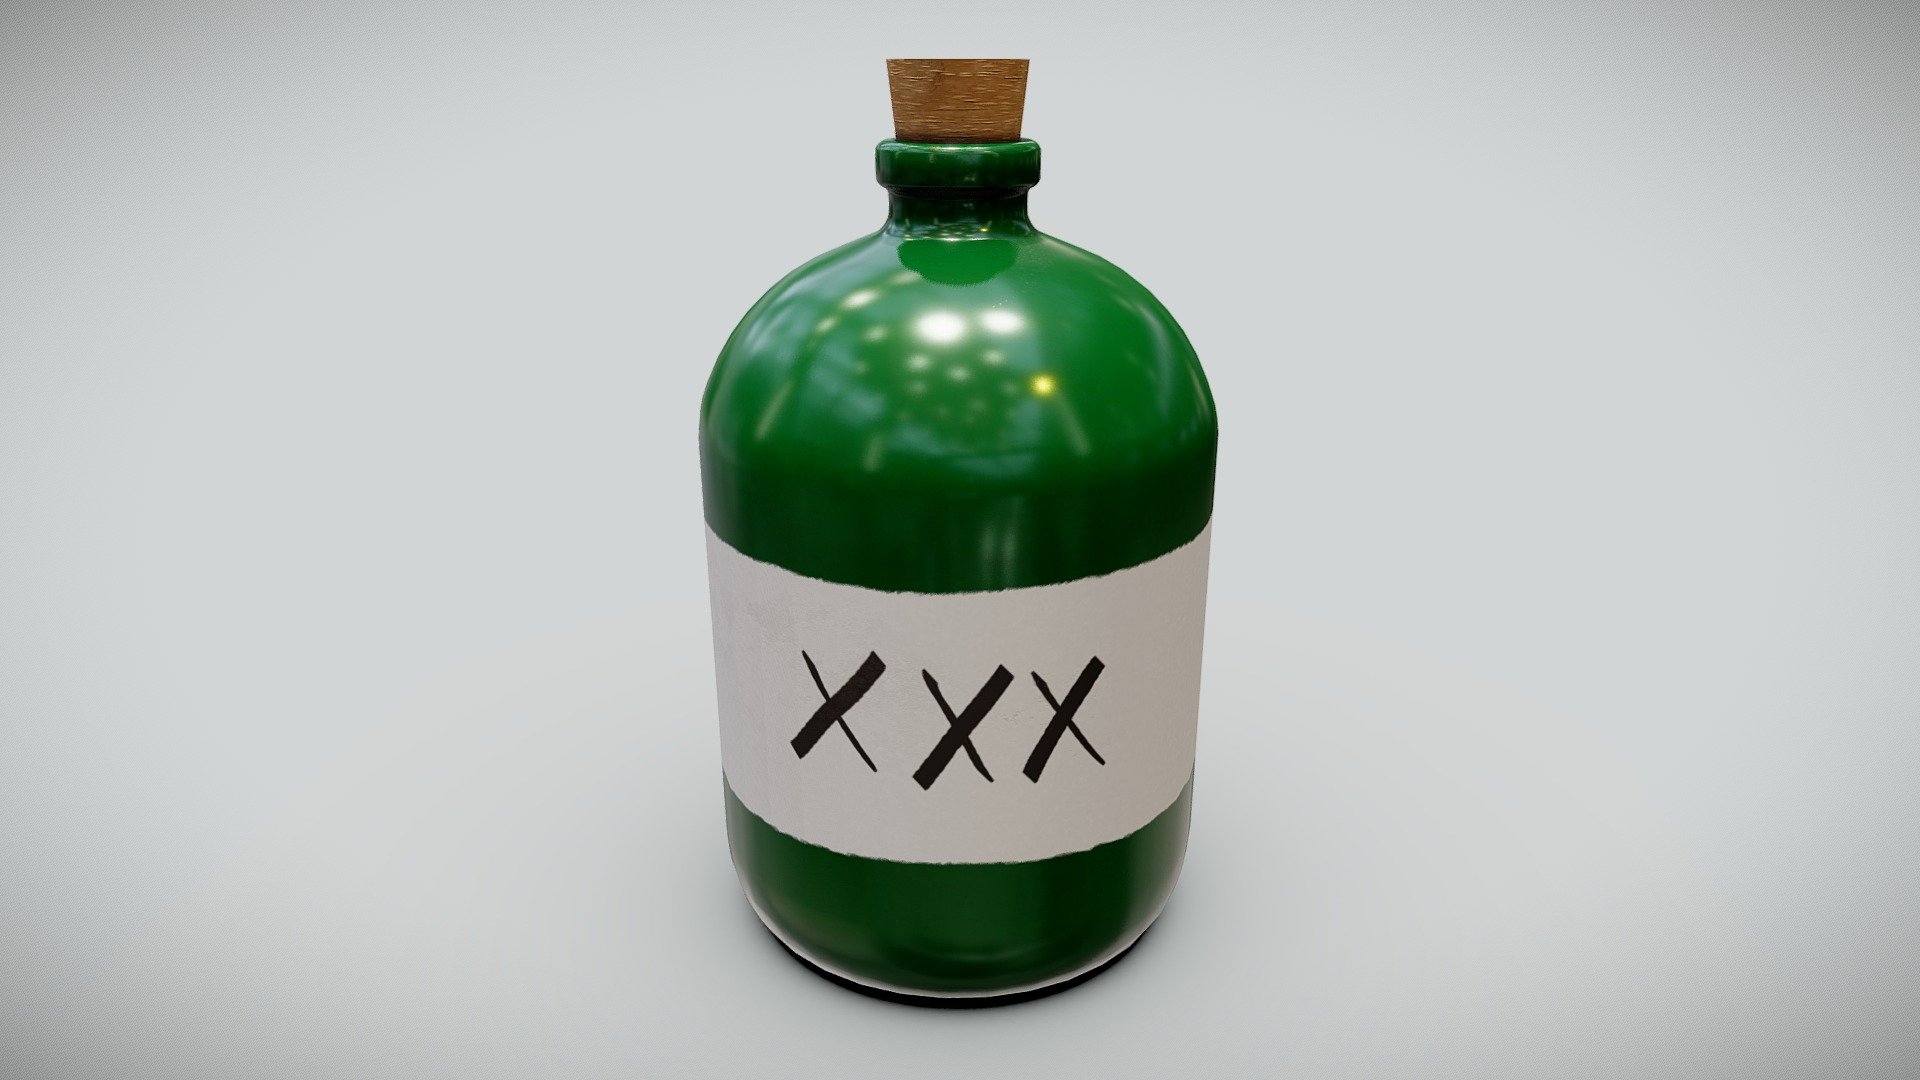 3D model Illegal Green Alcohol Bottle 4K PBR Textures Game-Ready VR / AR /  low-poly